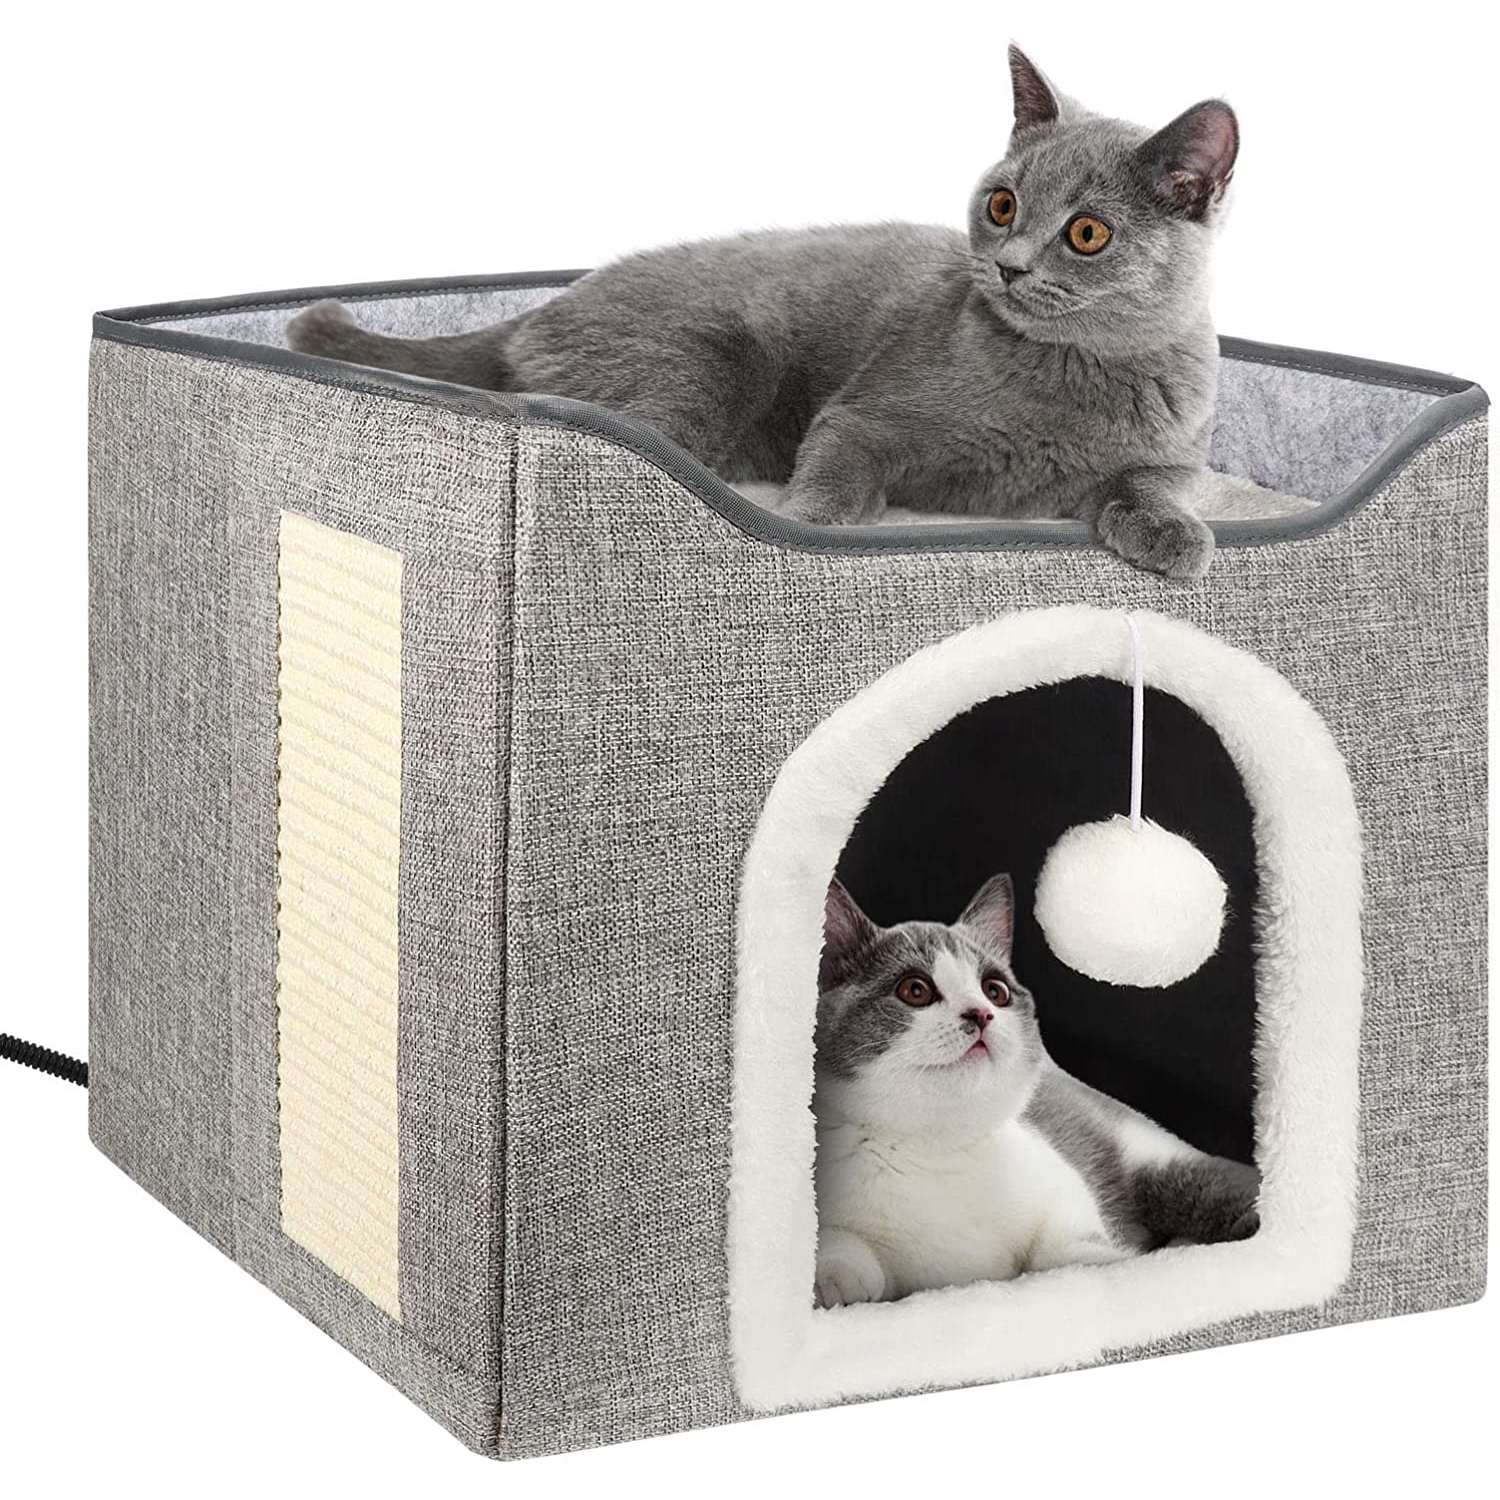 Heated Cat House, Heating Cat Houses for Indoor Outdoor Kitty with Heating Pad, Foldable Heated Kitty House Cat Shelter for Your Pet to Stay Warm and Cozy